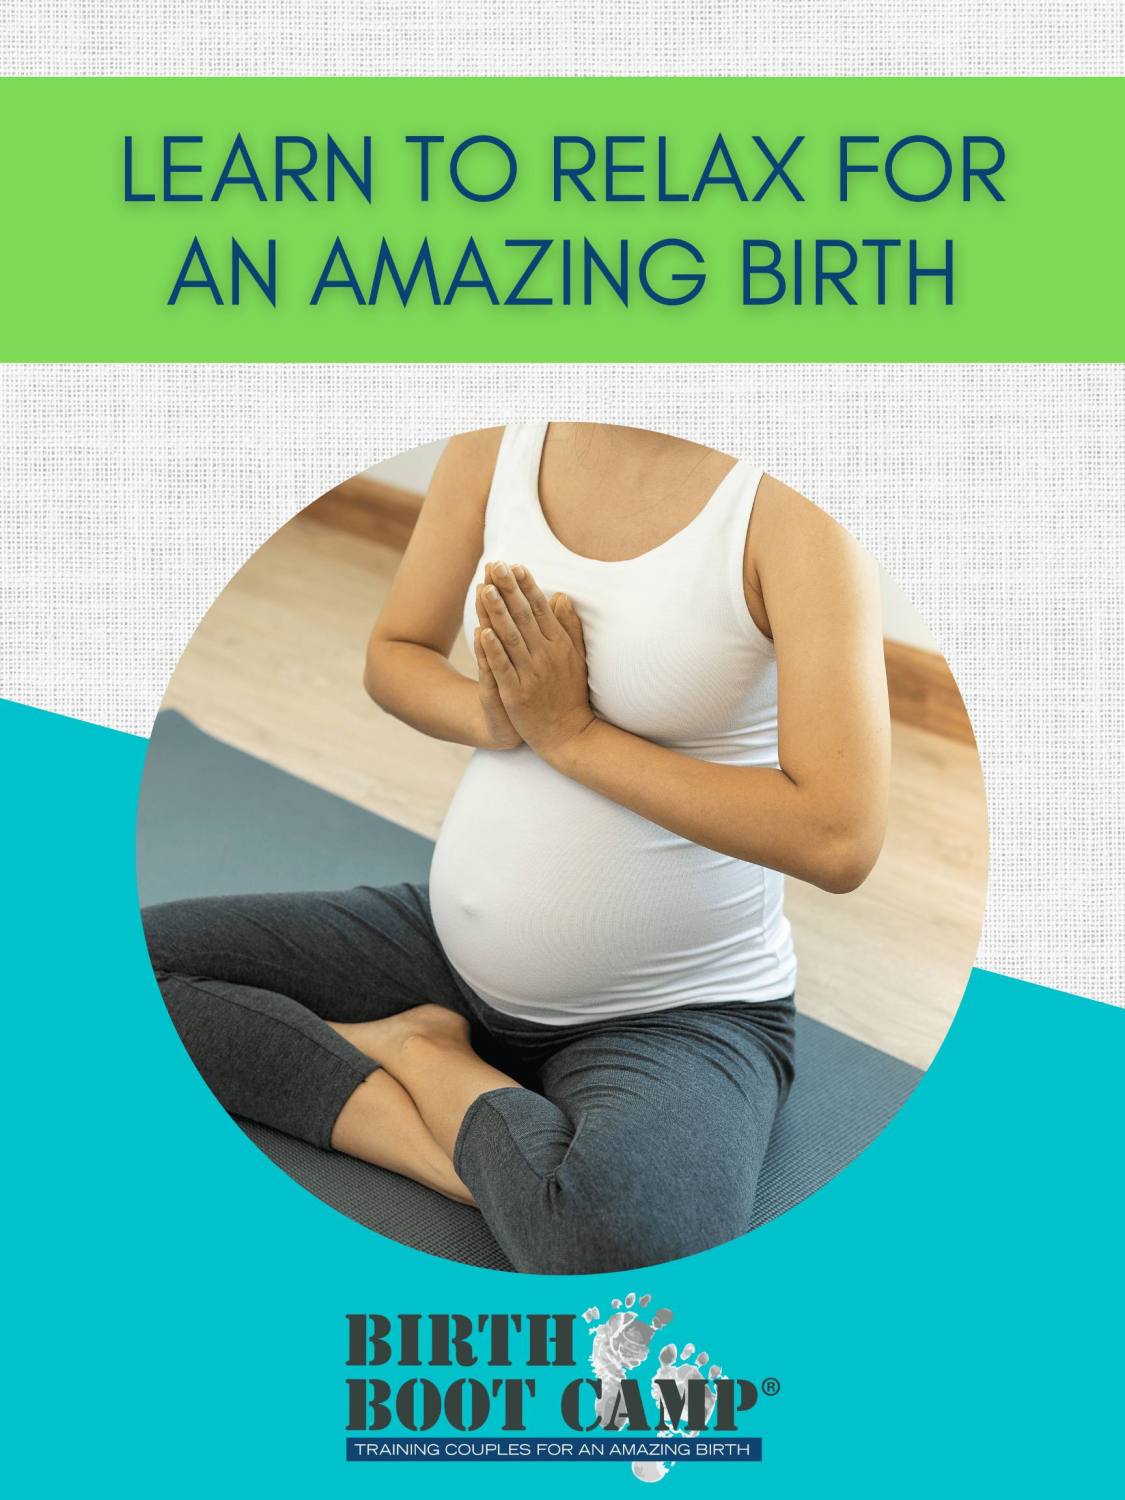 Learn to Relax for an Amazing Birth